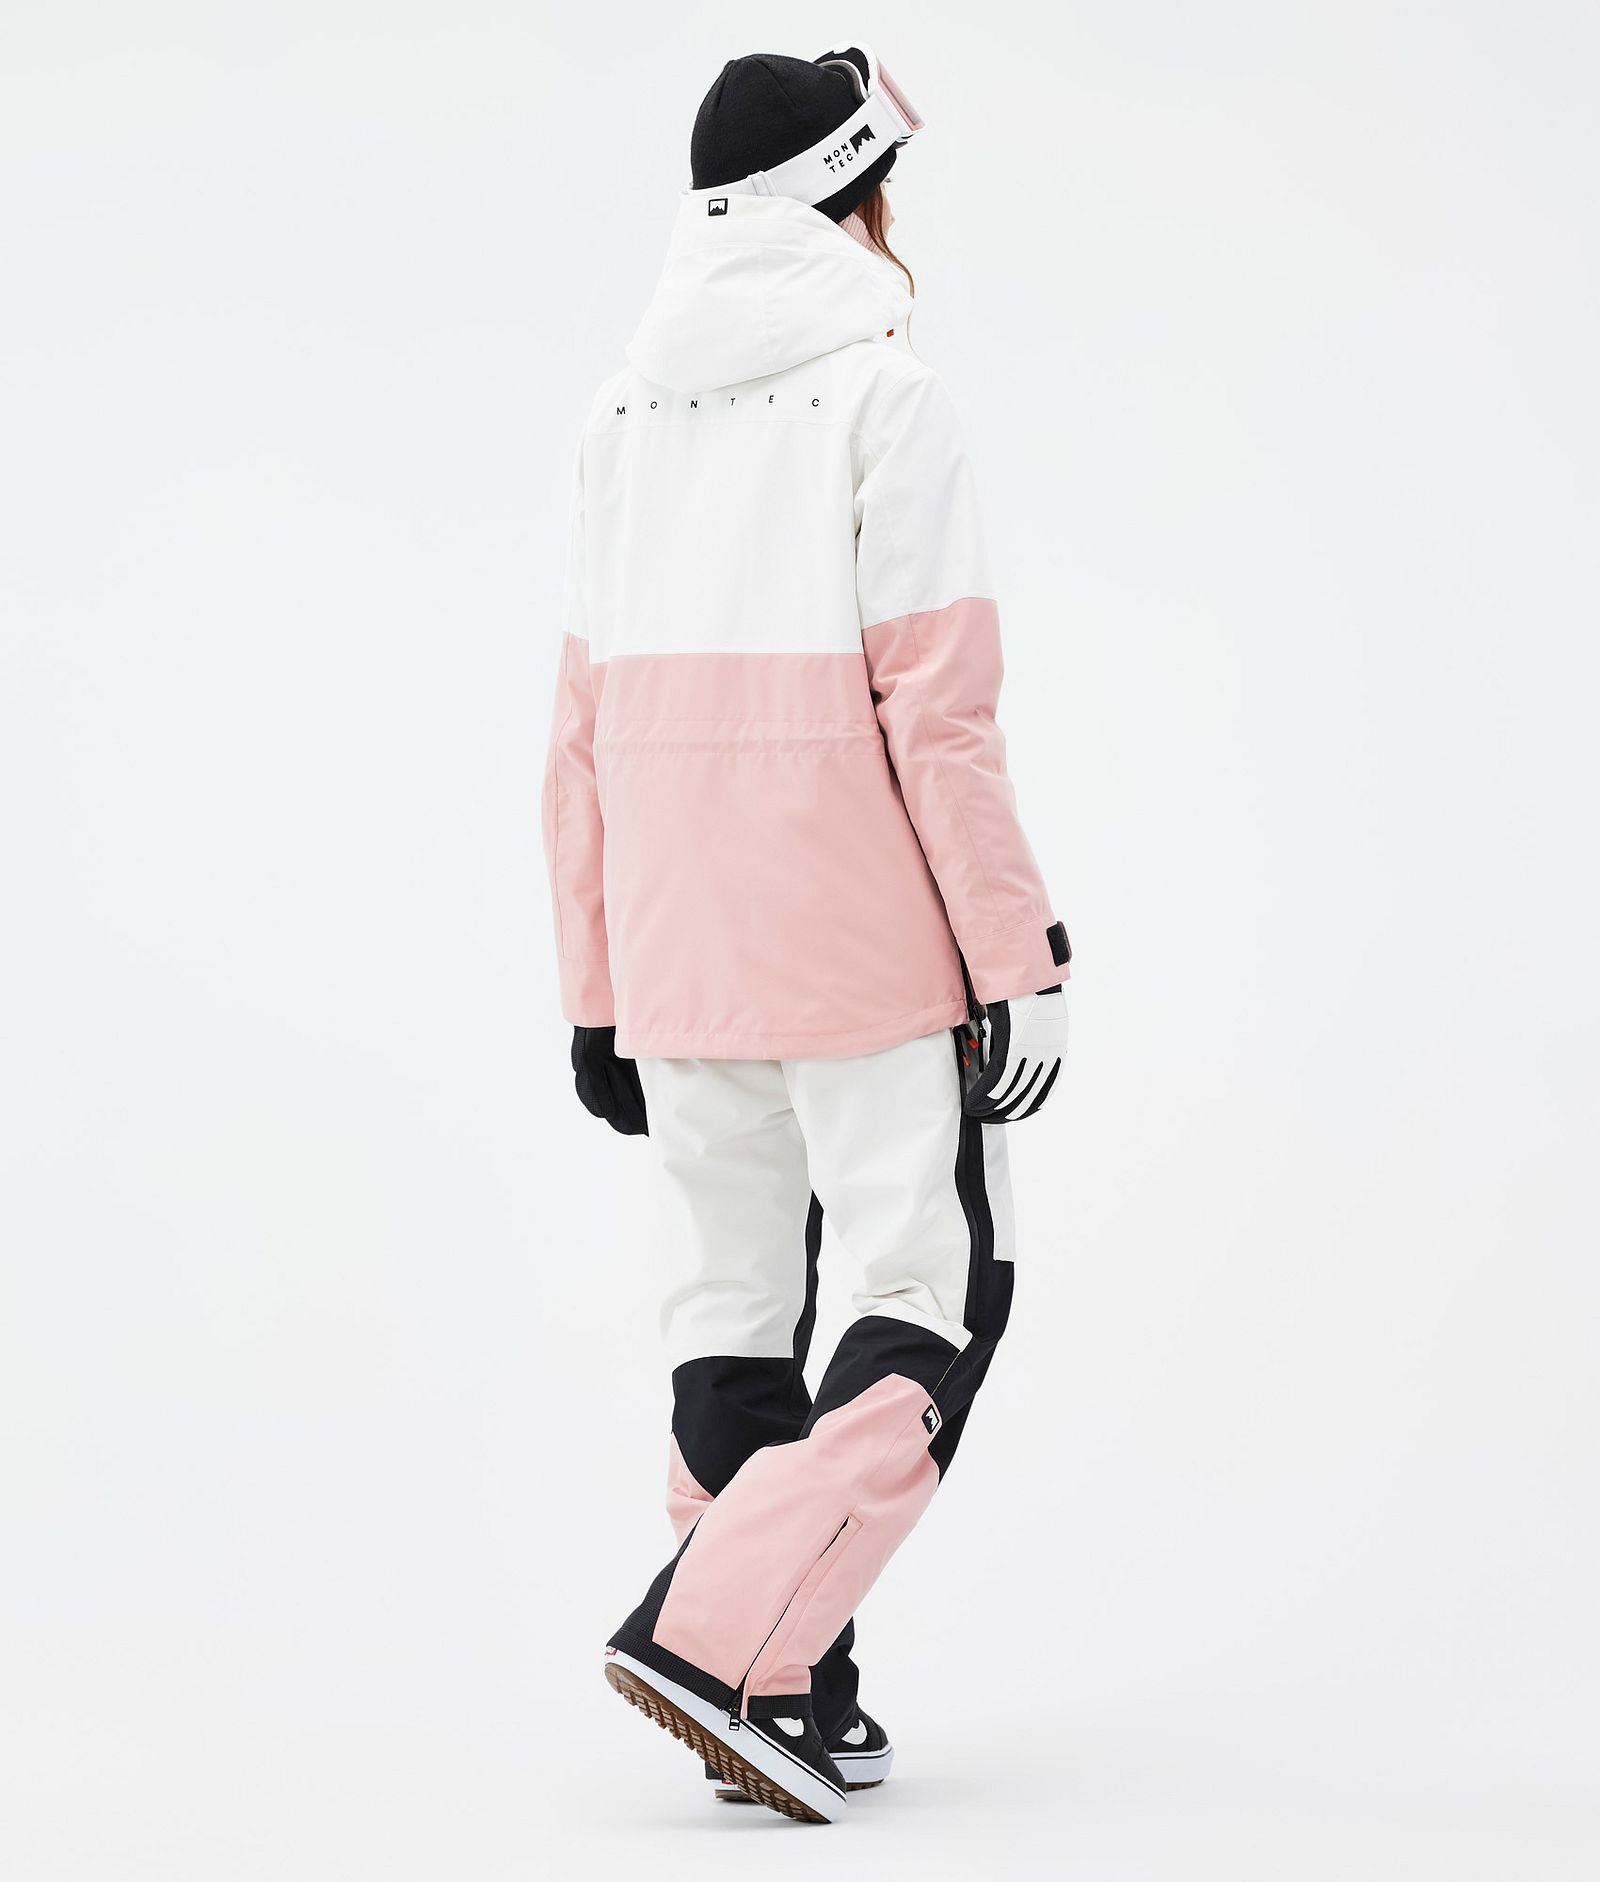 Dune W Outfit Snowboard Donna Old White/Black/Soft Pink, Image 2 of 2